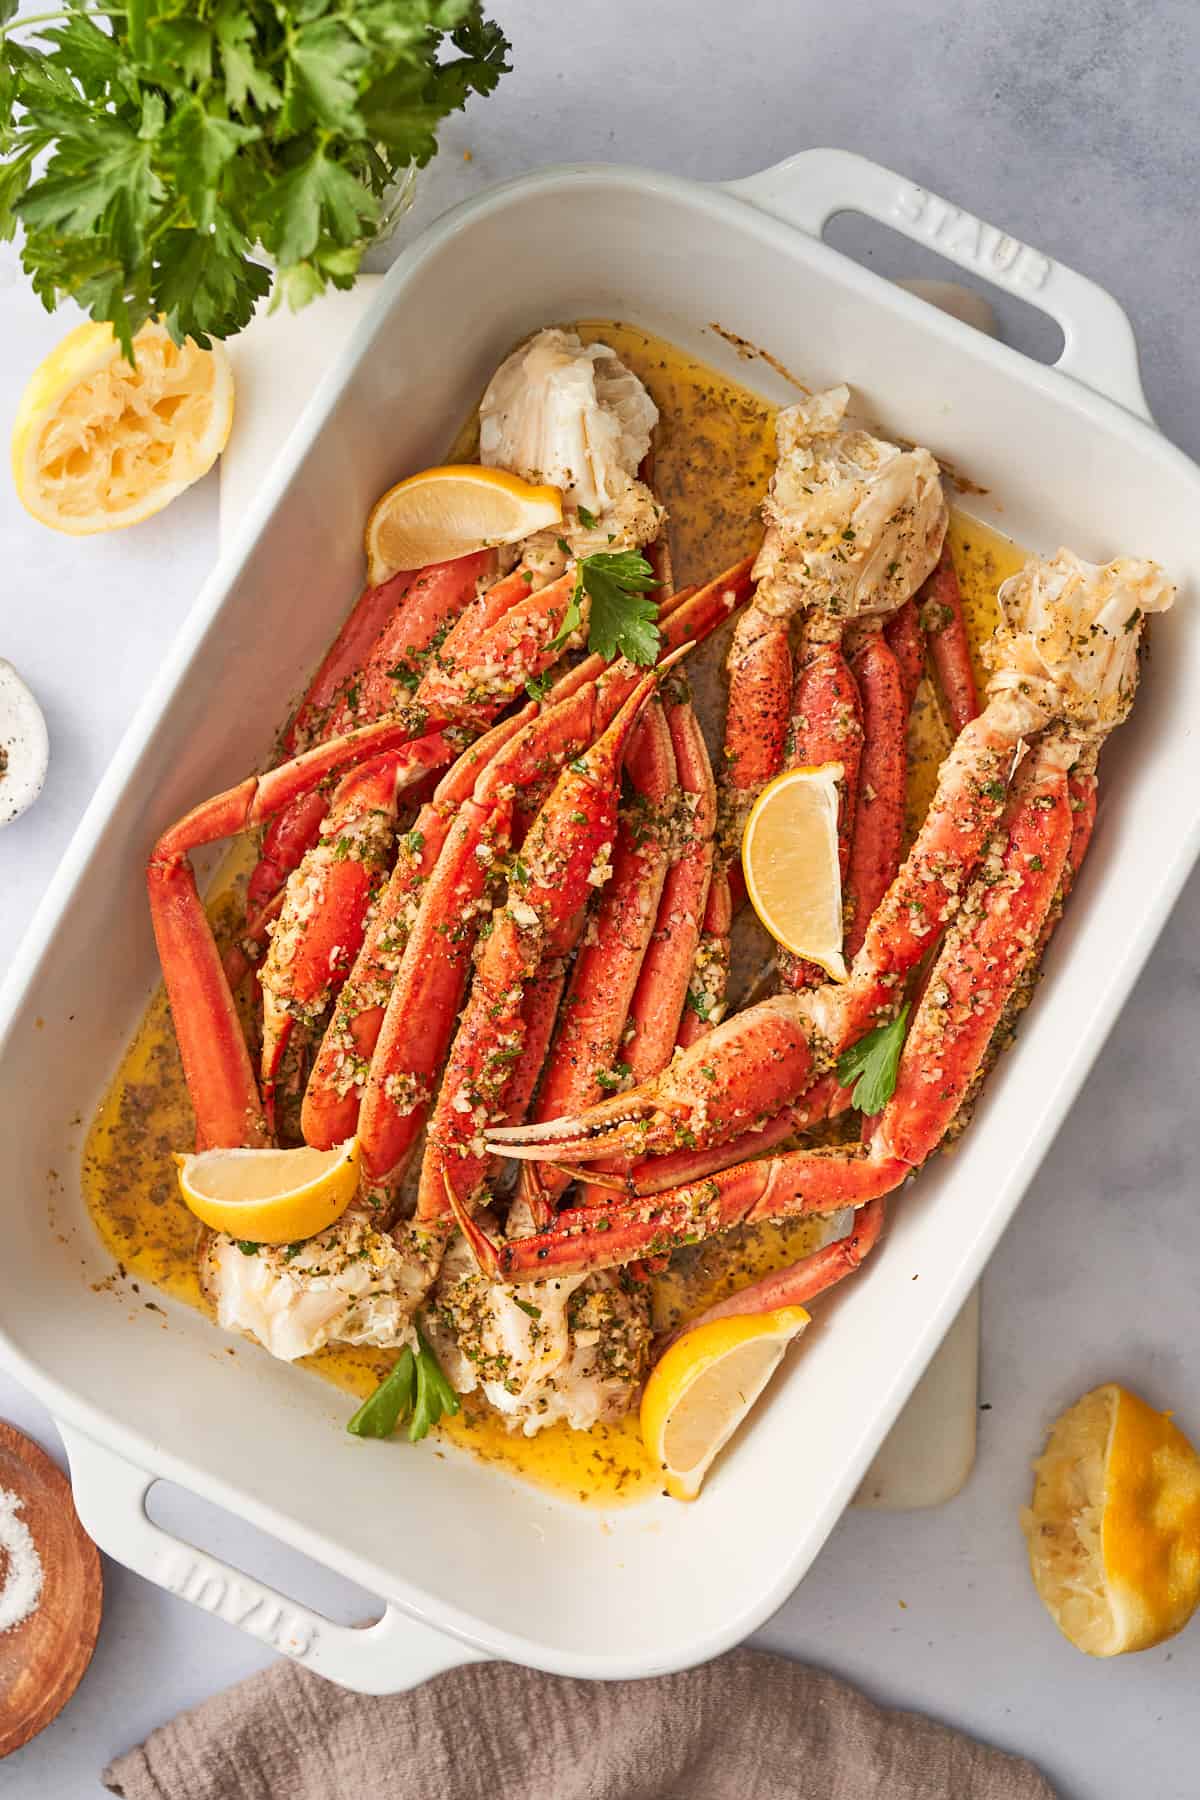 Baked crab legs with garlic butter and lemon sauce in a casserole dish.